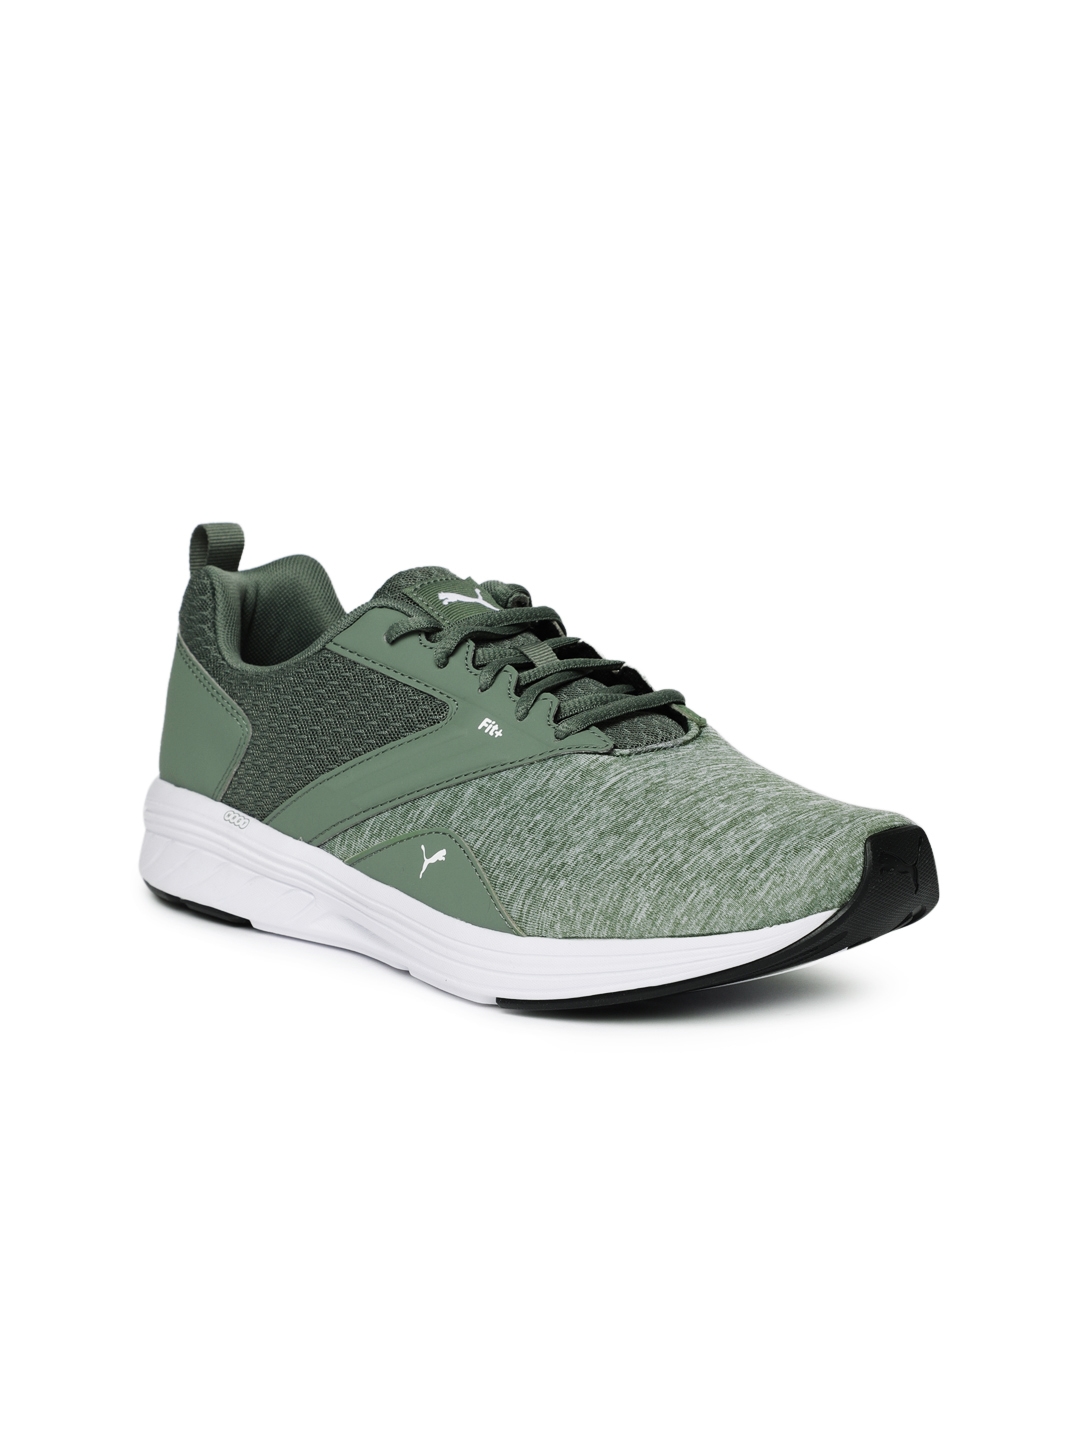 Green NRGY Comet Running Shoes 